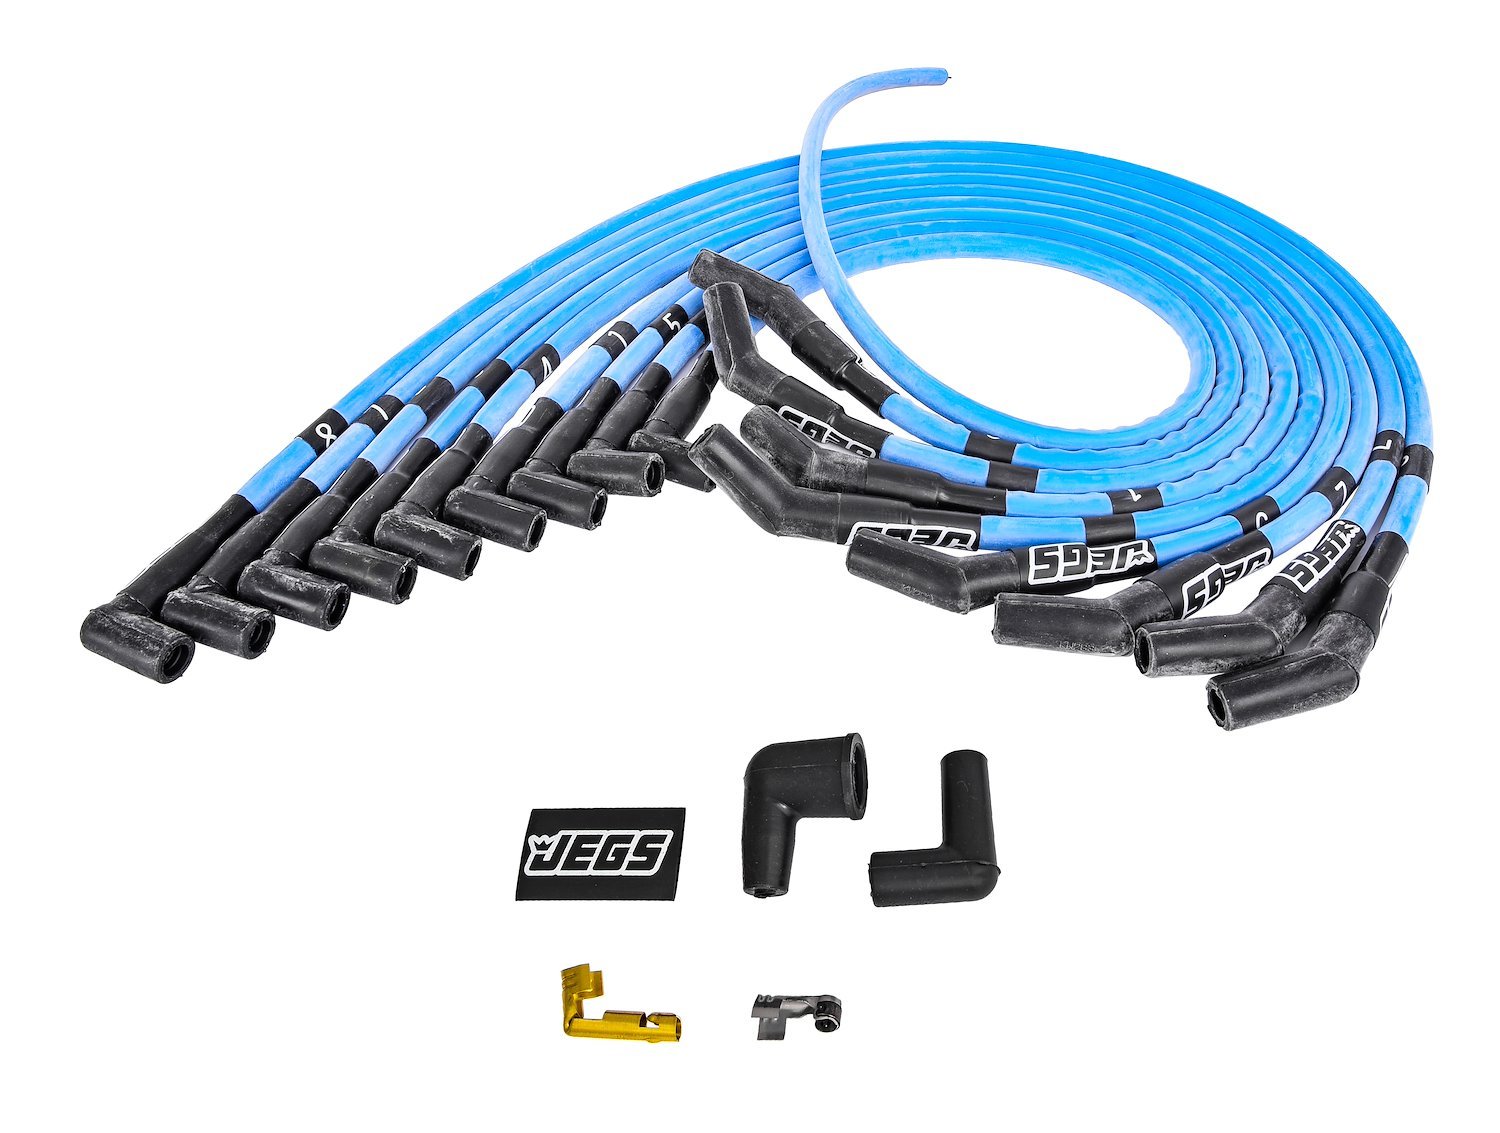 8mm Hi-Temp Sleeved Spark Plug Wire Set for Big Block Ford 429 & 460 w/HEI, Under Header w/135-degree Boots [Blue]